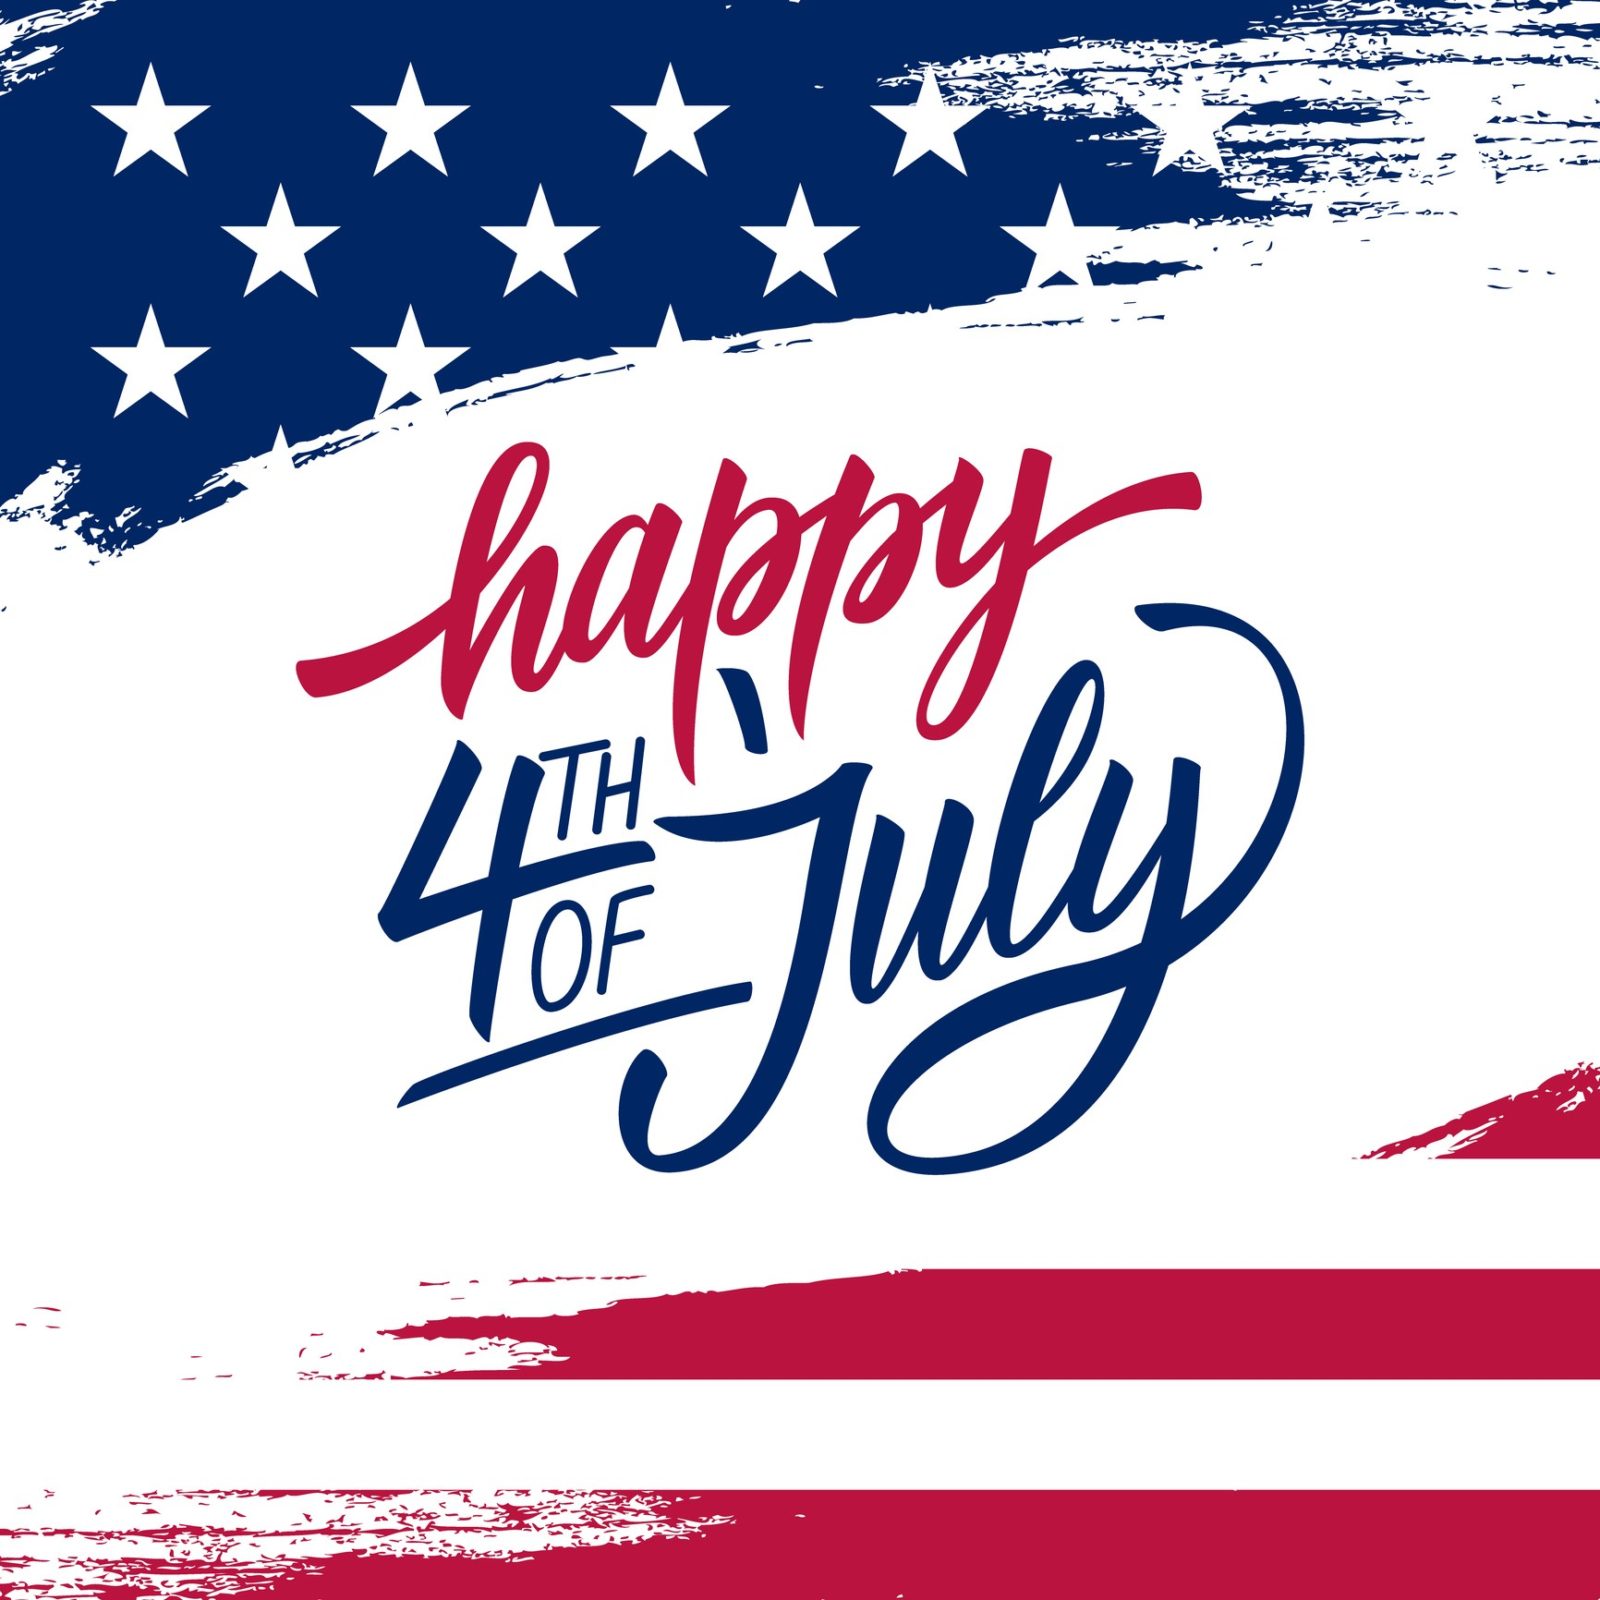 Happy Independence Day greeting card with brush stroke background in United States national flag colors and hand lettering text Happy 4th of July. Vector illustration.